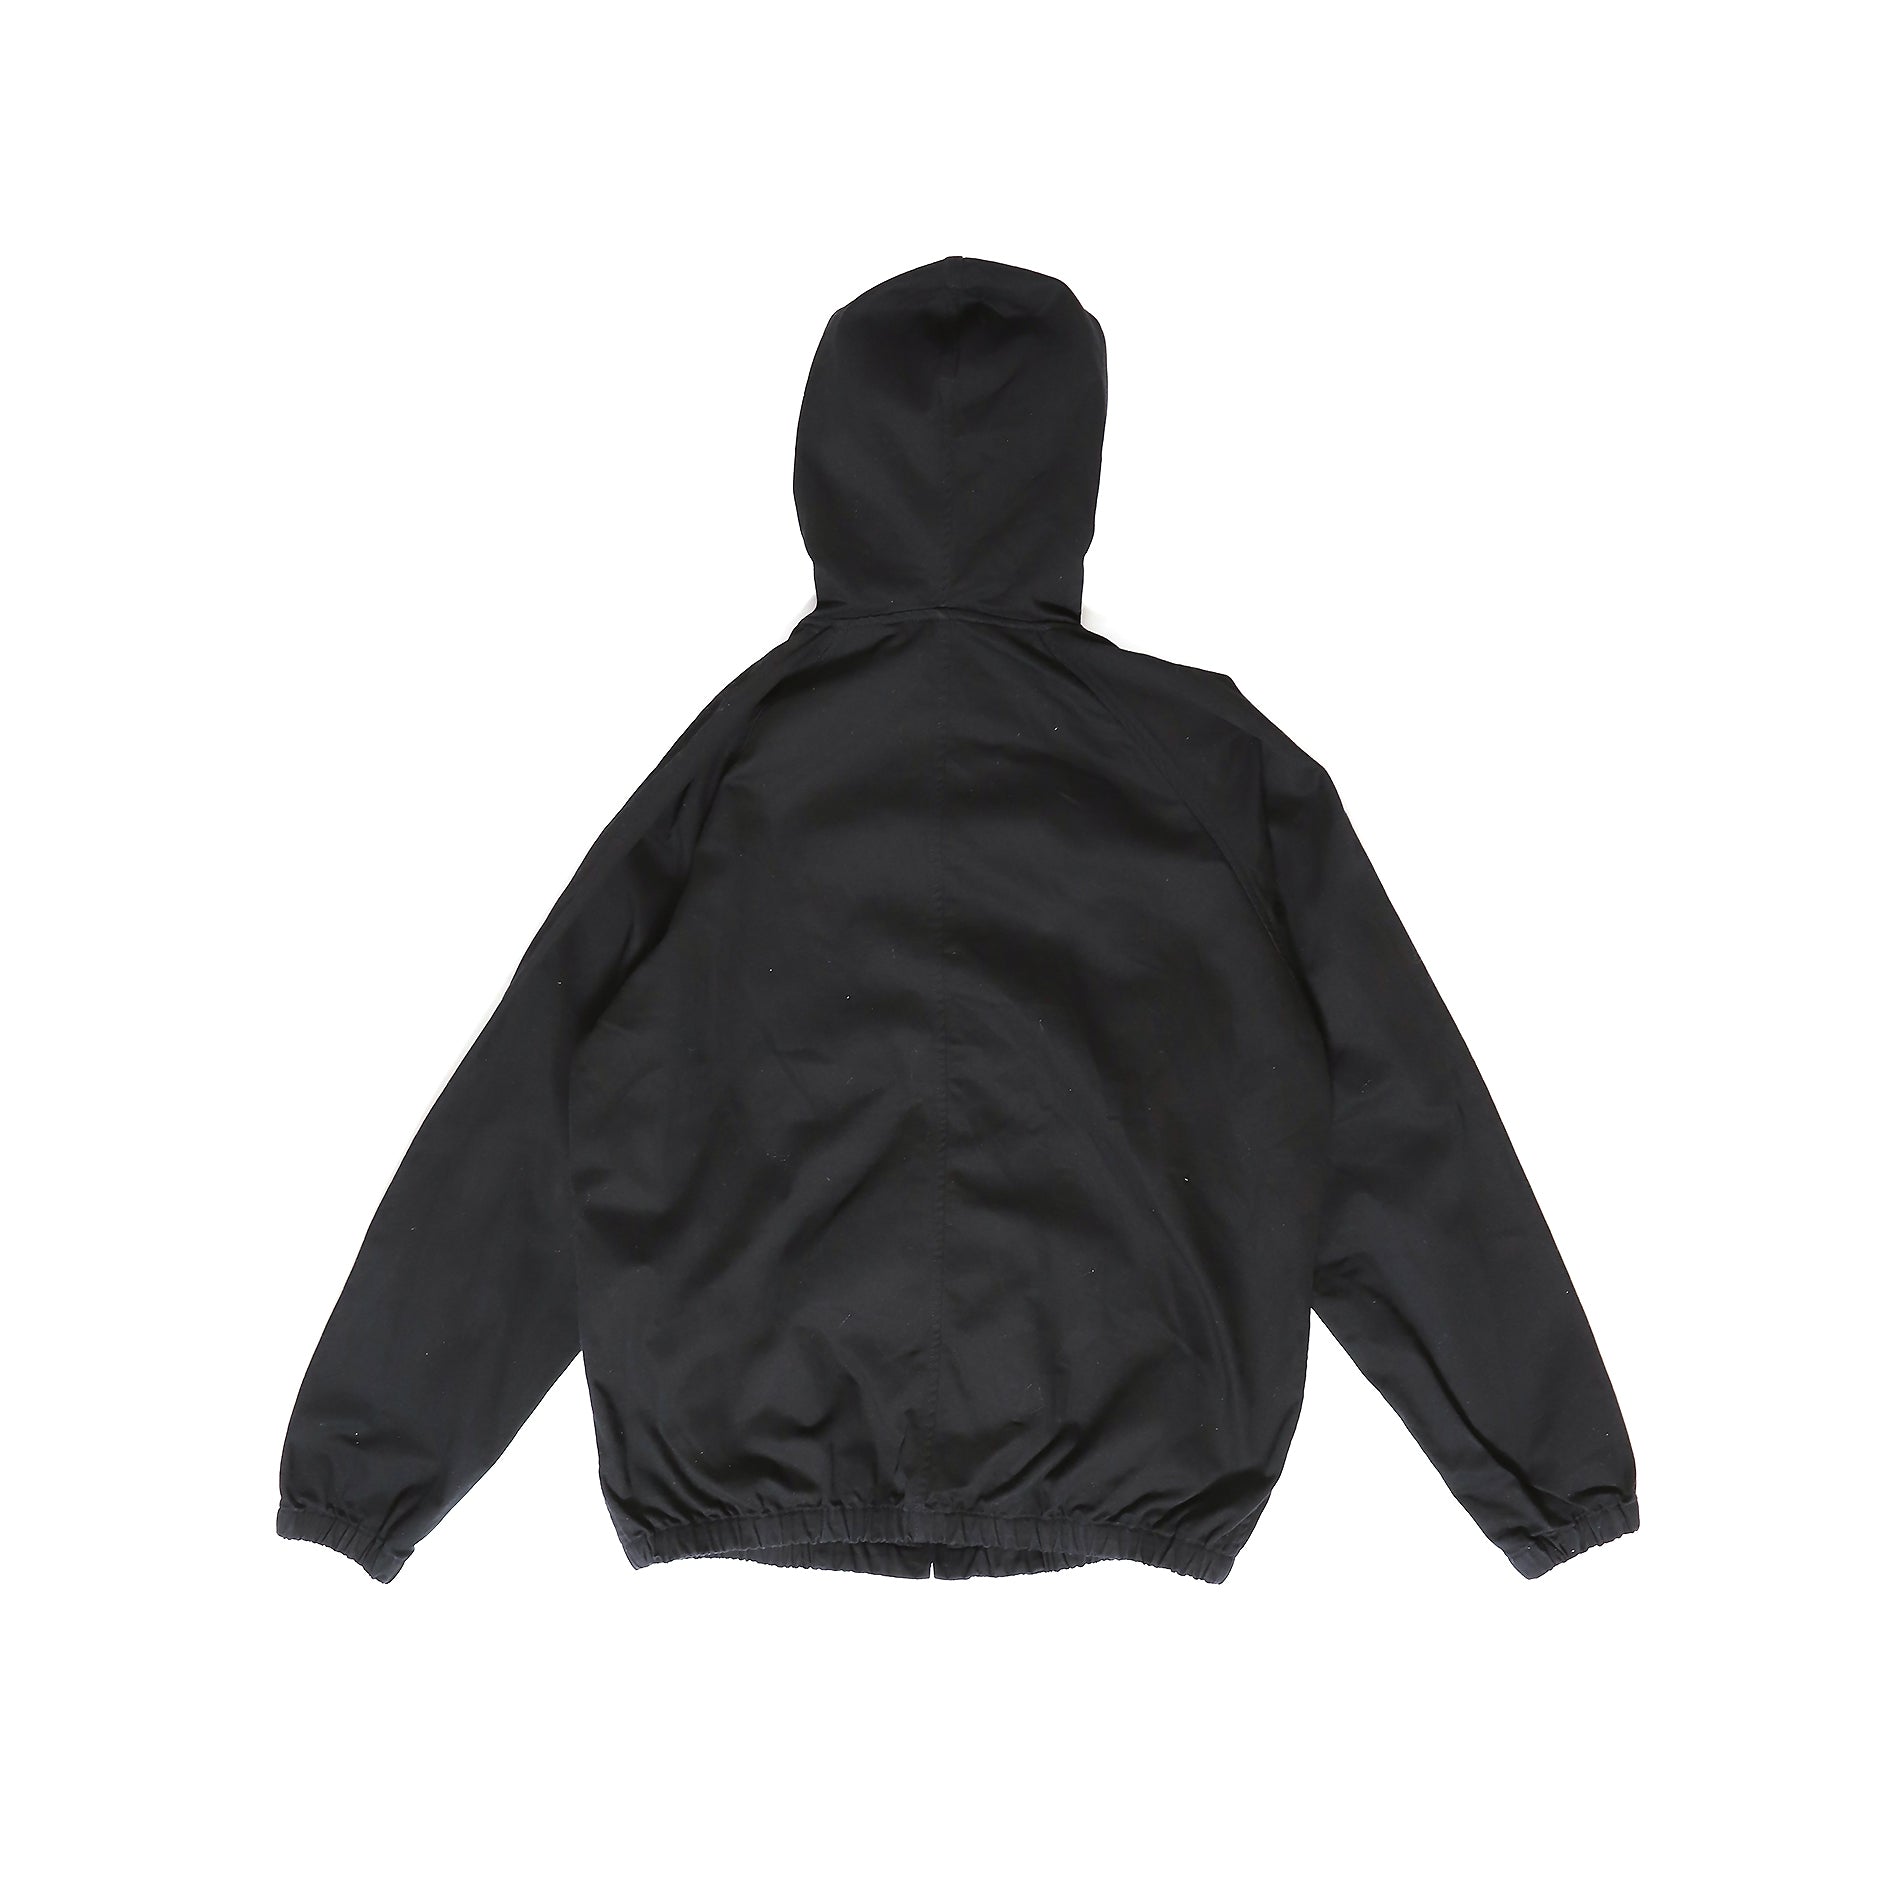 Comme des Garcons Homme AW01 Hooded Reconstructed Split Jacket